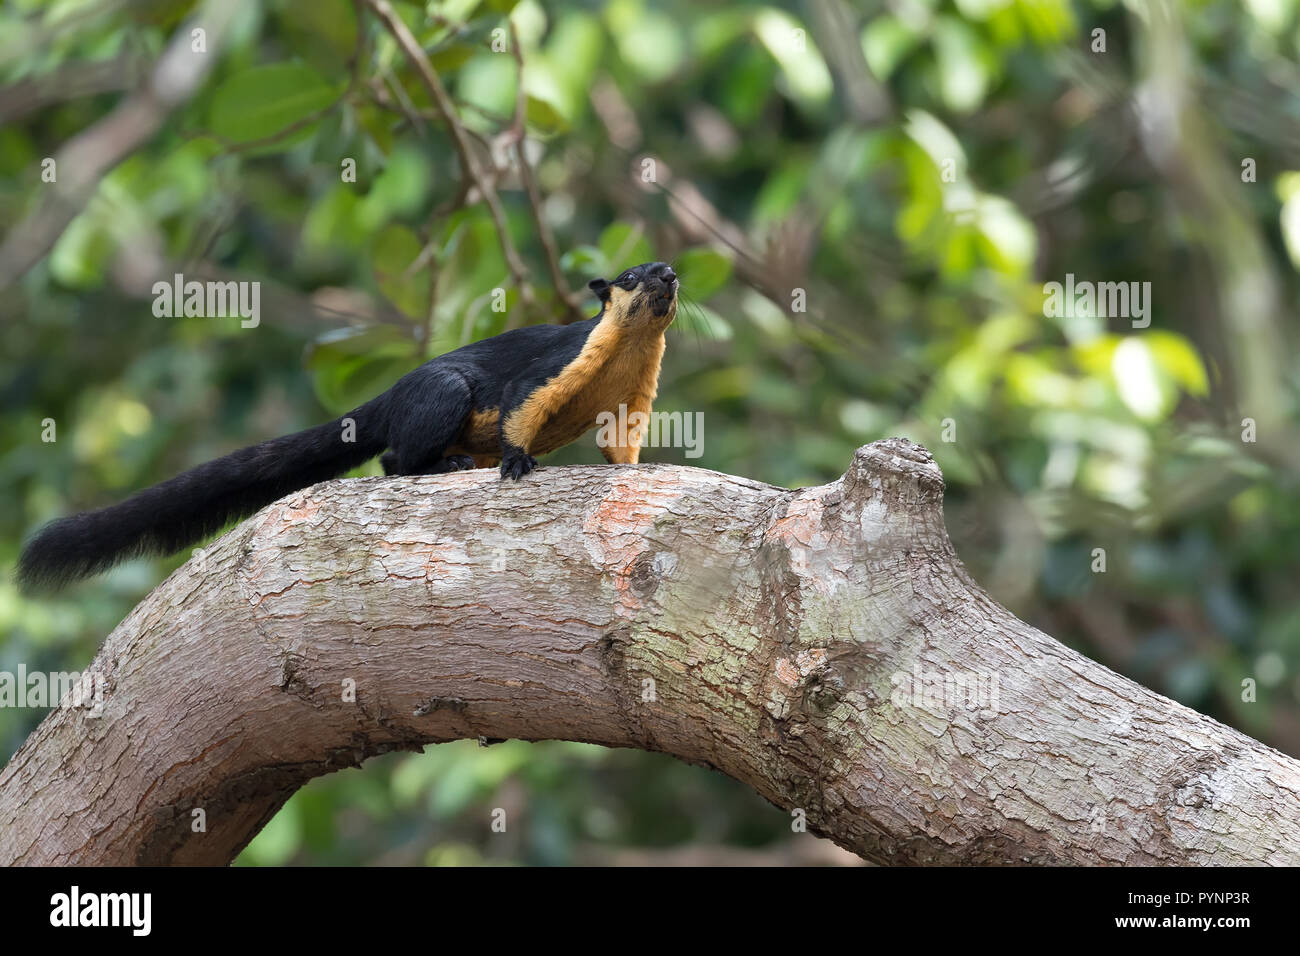 Wild Giant black Squirrel (Ratufa bicolor), standing on a branch in the Penang national park, Malaysia Stock Photo